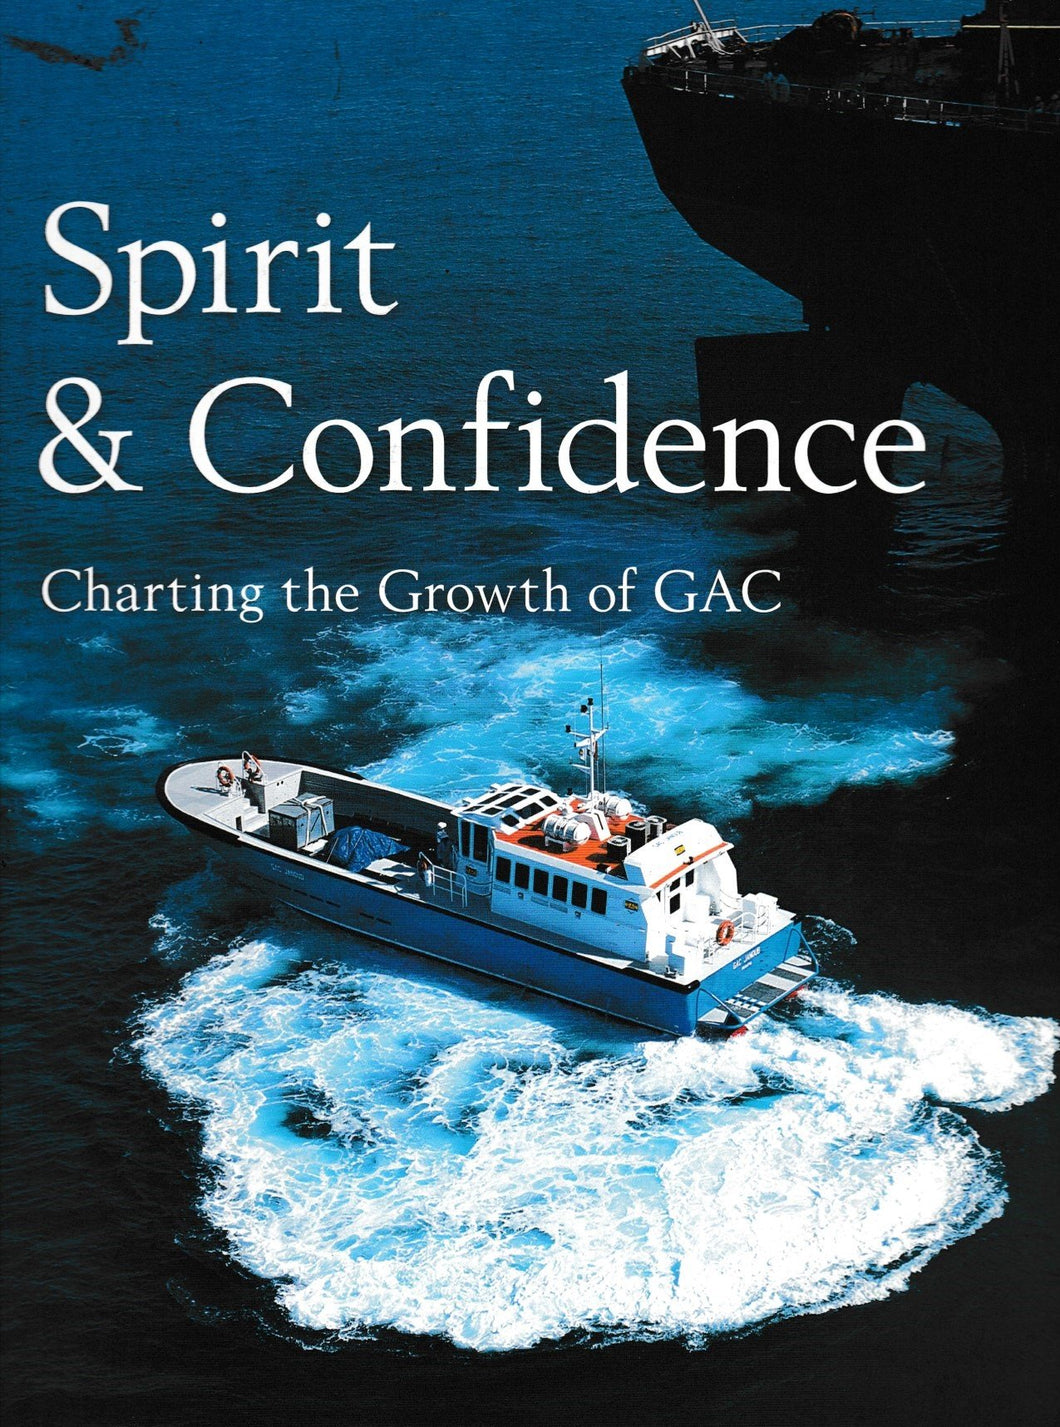 Spirit & Confidence.Charting the Growth of GAC